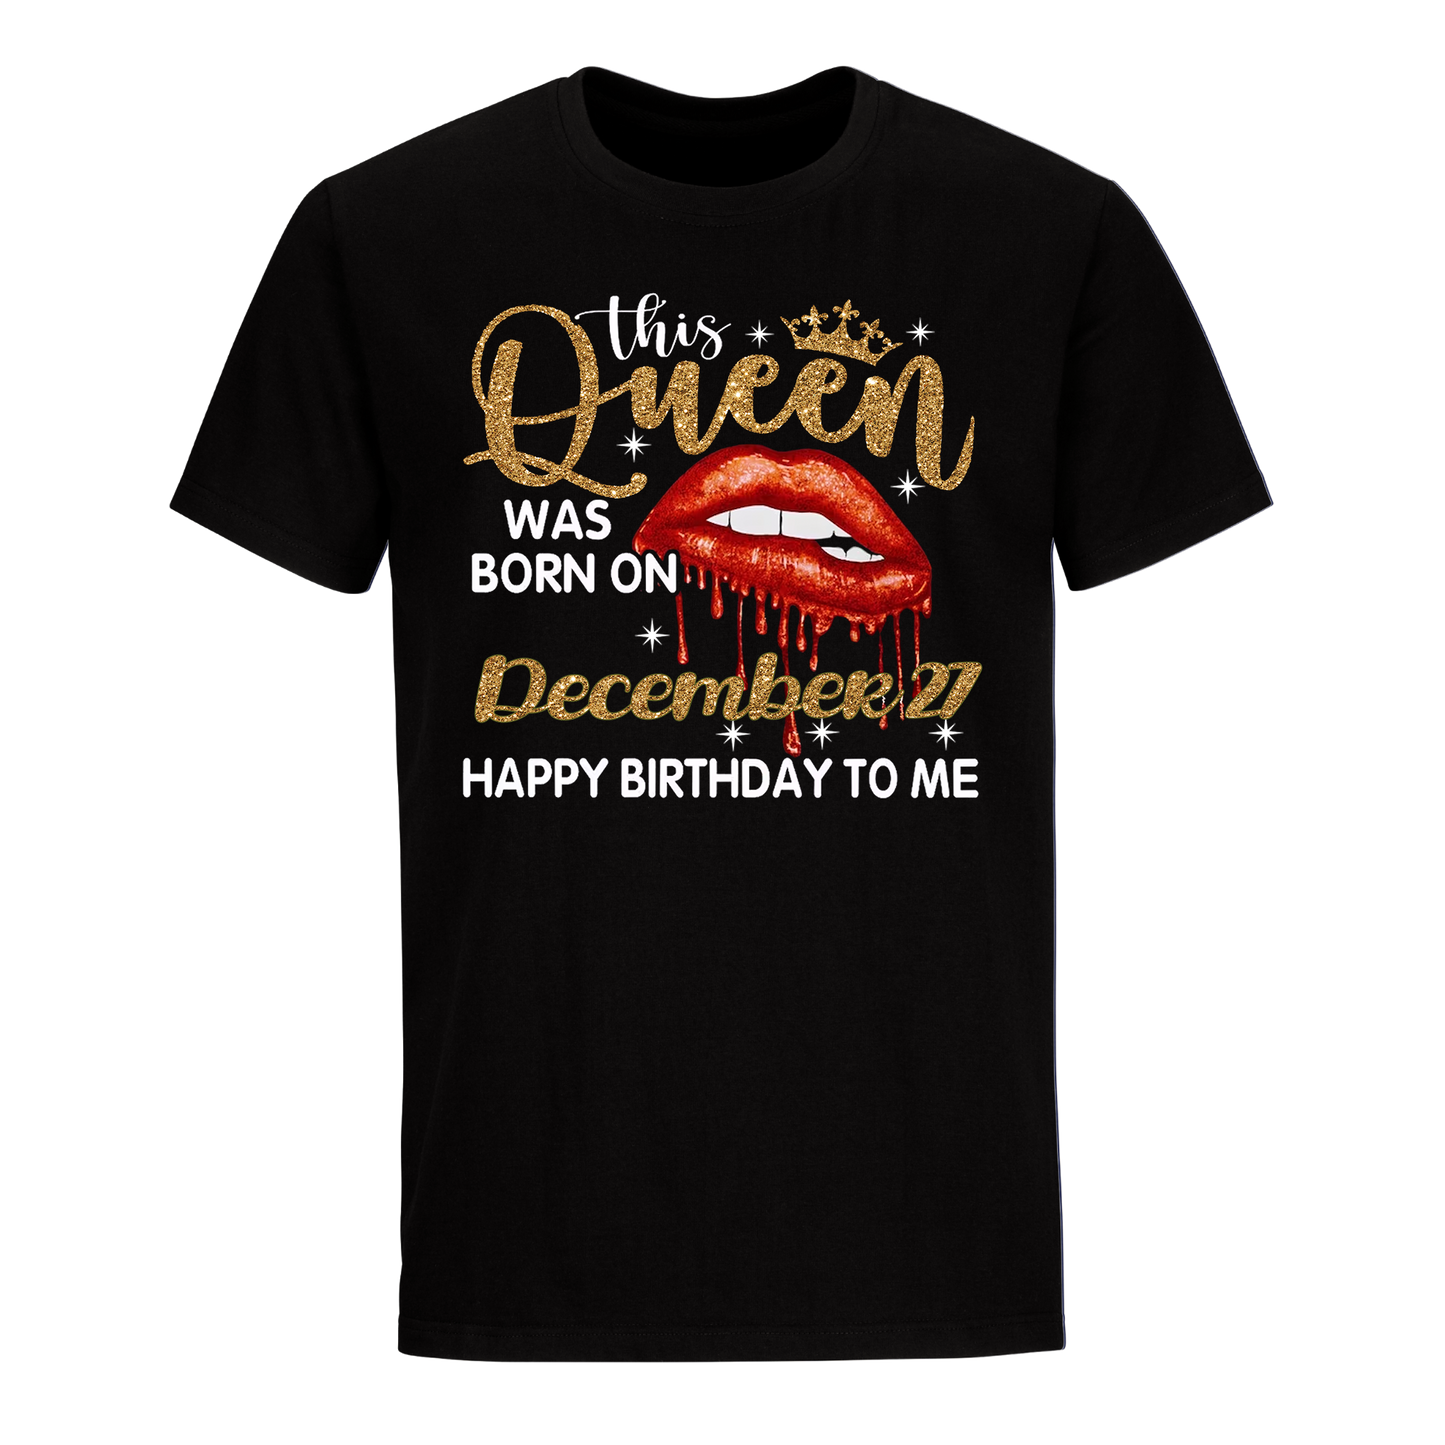 THIS QUEEN WAS BORN ON DECEMBER 27 UNISEX SHIRT